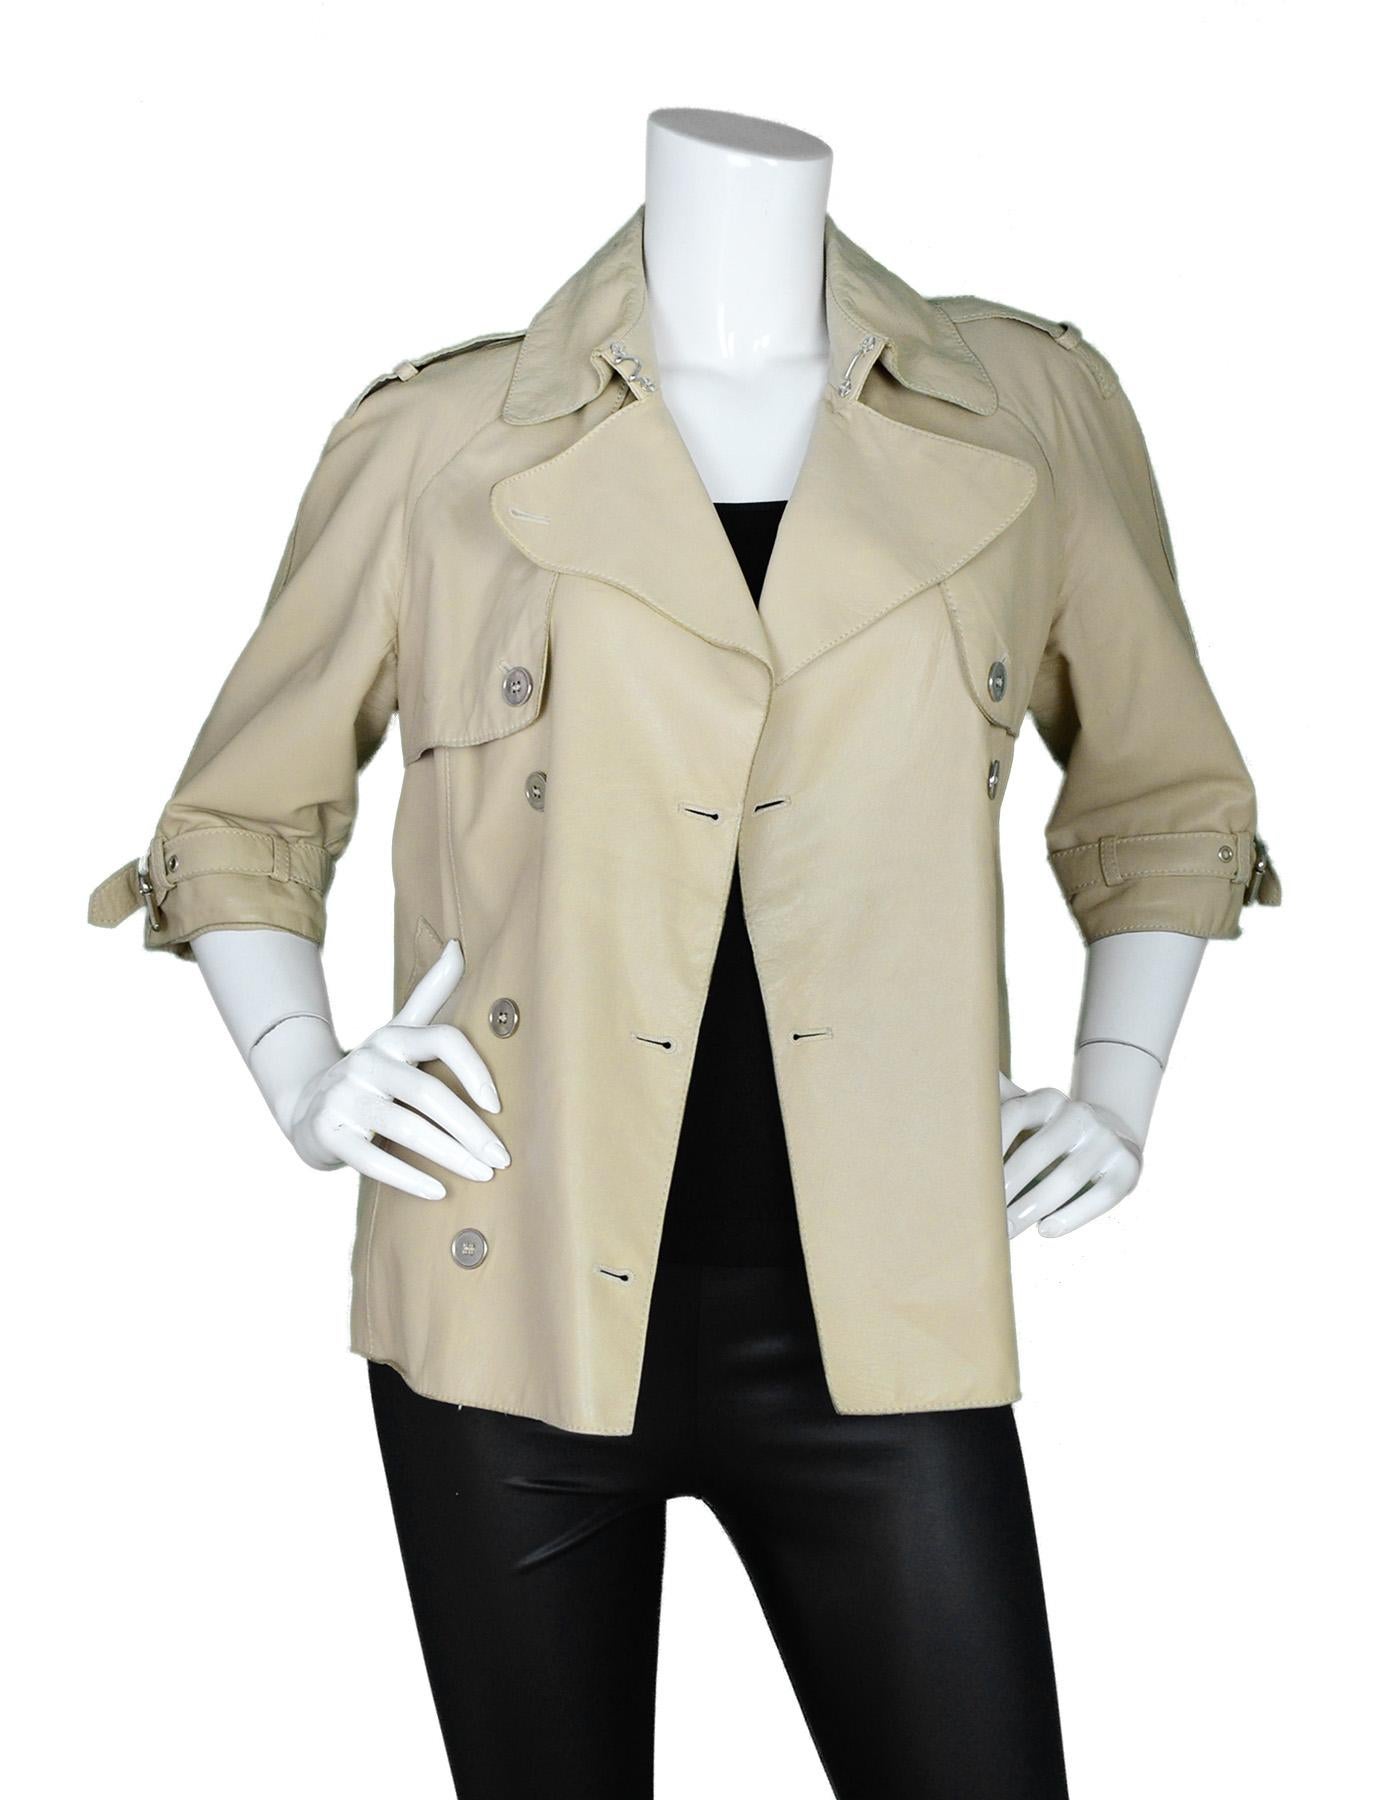 Dolce & Gabbana Beige Leather Double Breasted Jacket W/ 3/4 Sleeves Sz 40

Made In: Italy
Color: Beige
Materials: 100% lambskin 
Lining: 100% silk
Opening/Closure: Double breasted button front
Overall Condition: Good pre-owned condition, has marks